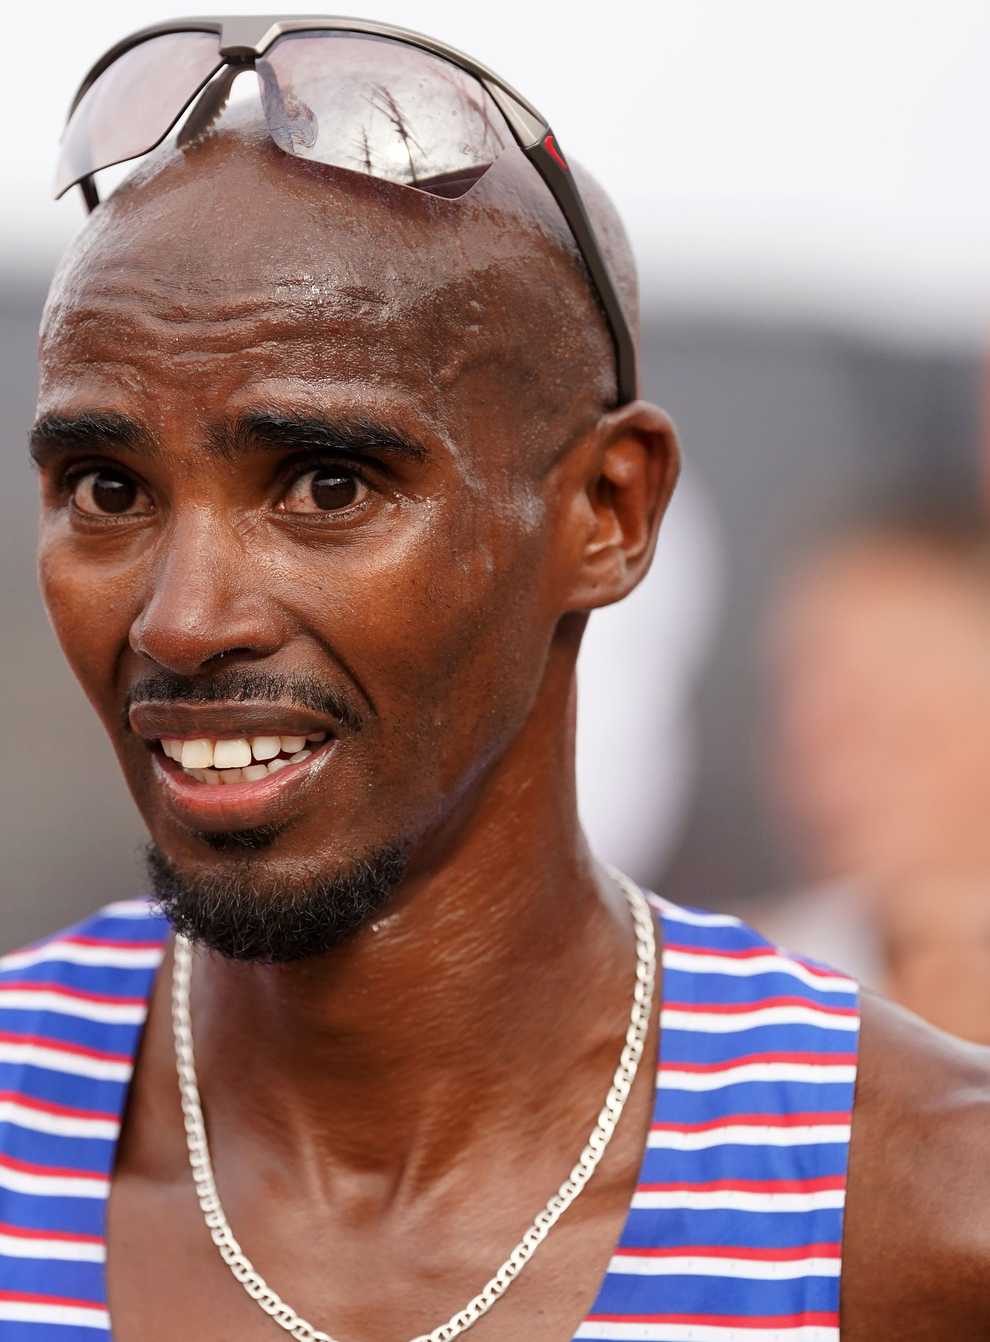 Sir Mo Farah has pulled out of the London Marathon due to a hip injury (Adam Davy/PA)